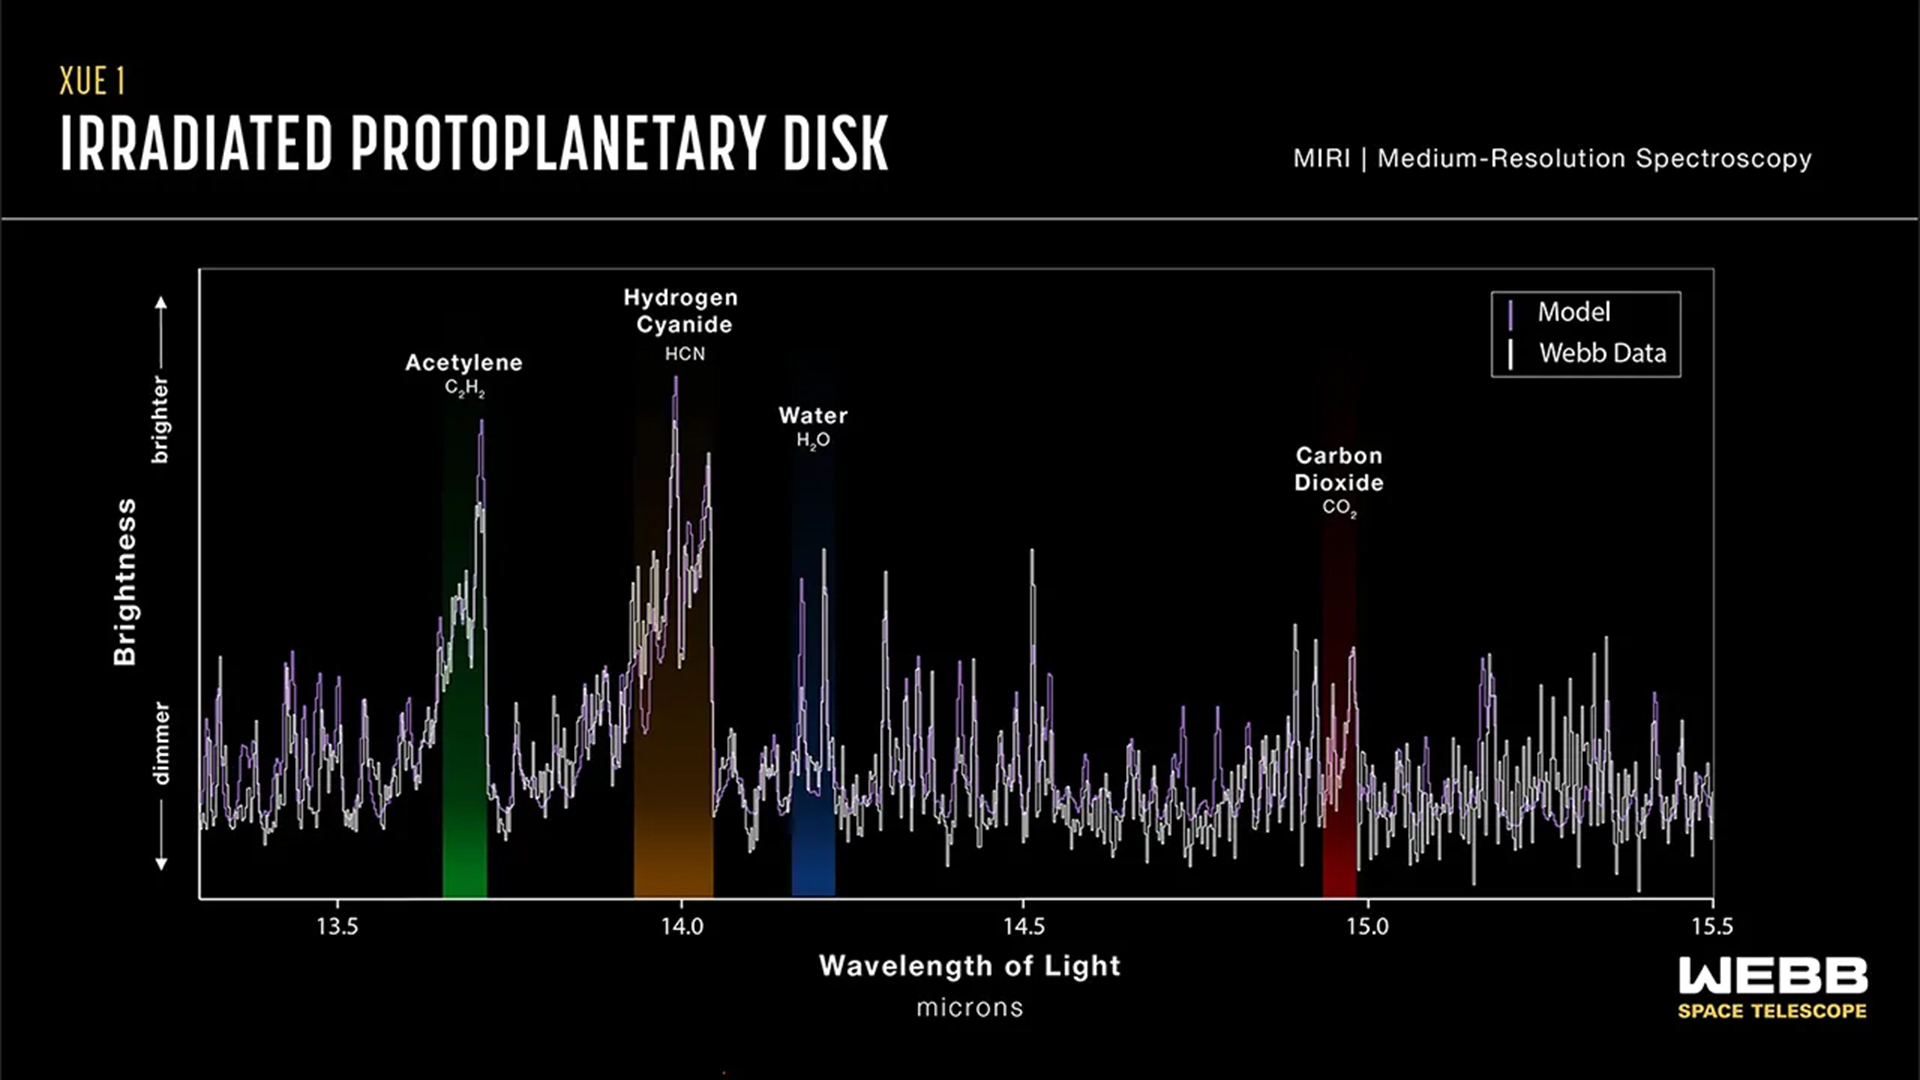 The spectrum of light from the protoplanetary disk, with water in its inner region highlighted in blue.